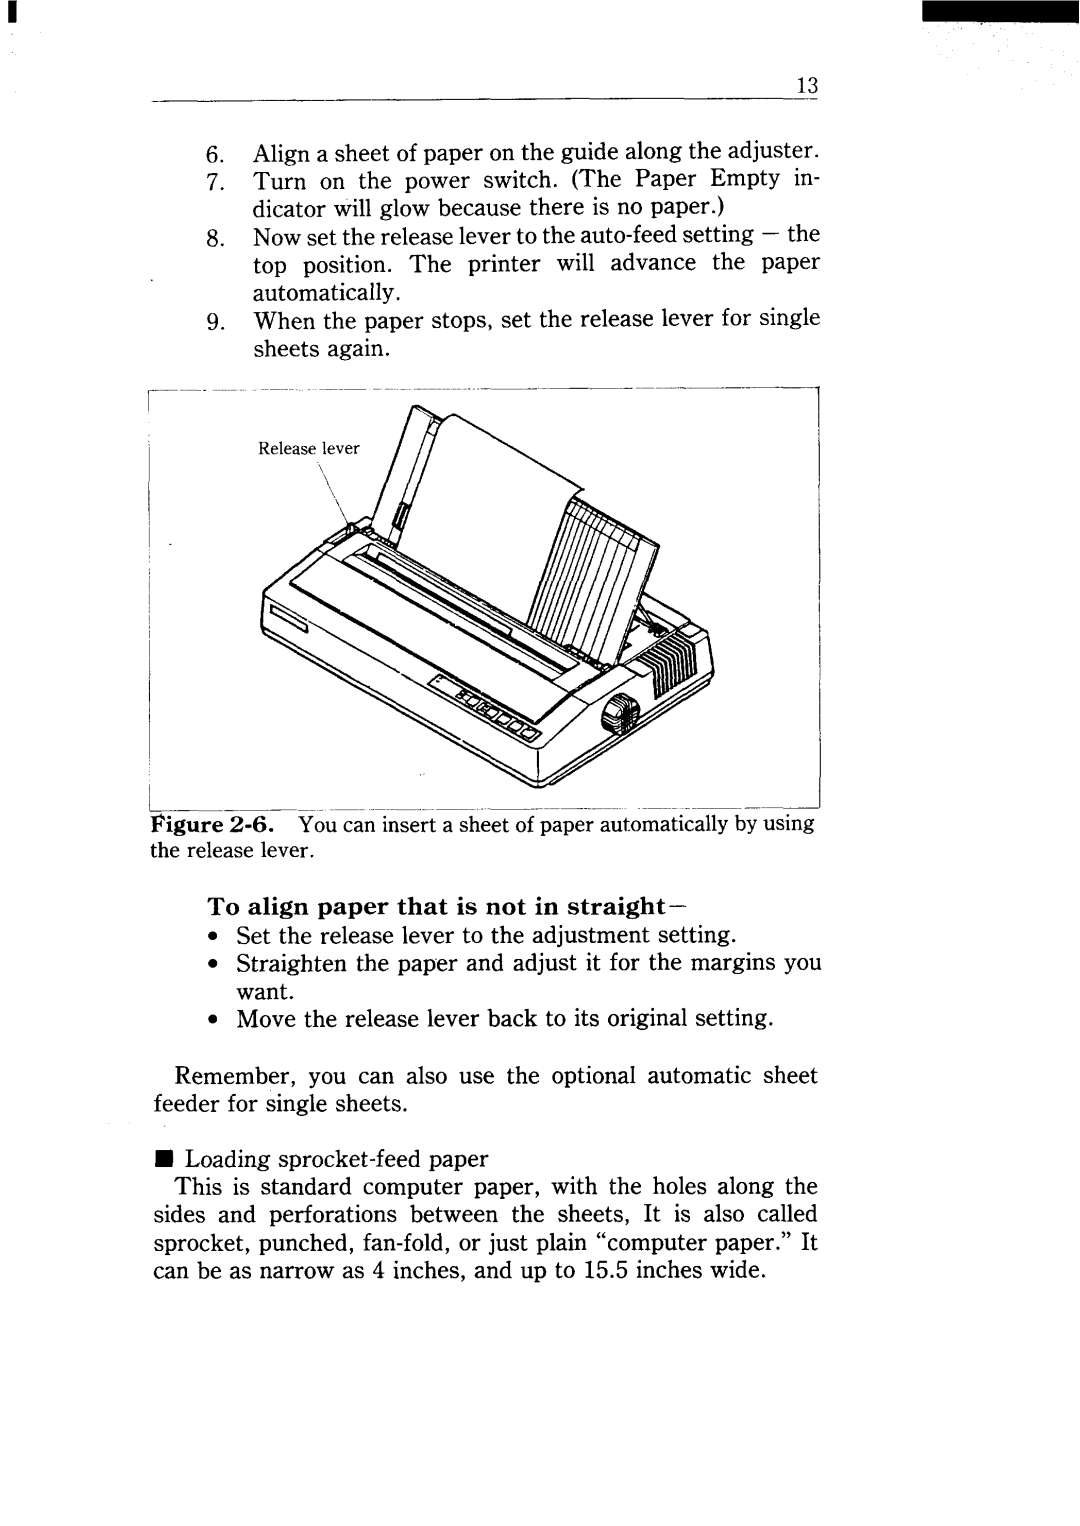 Star Micronics NX-15 user manual Align a sheet of paper on the guide along the adjuster 